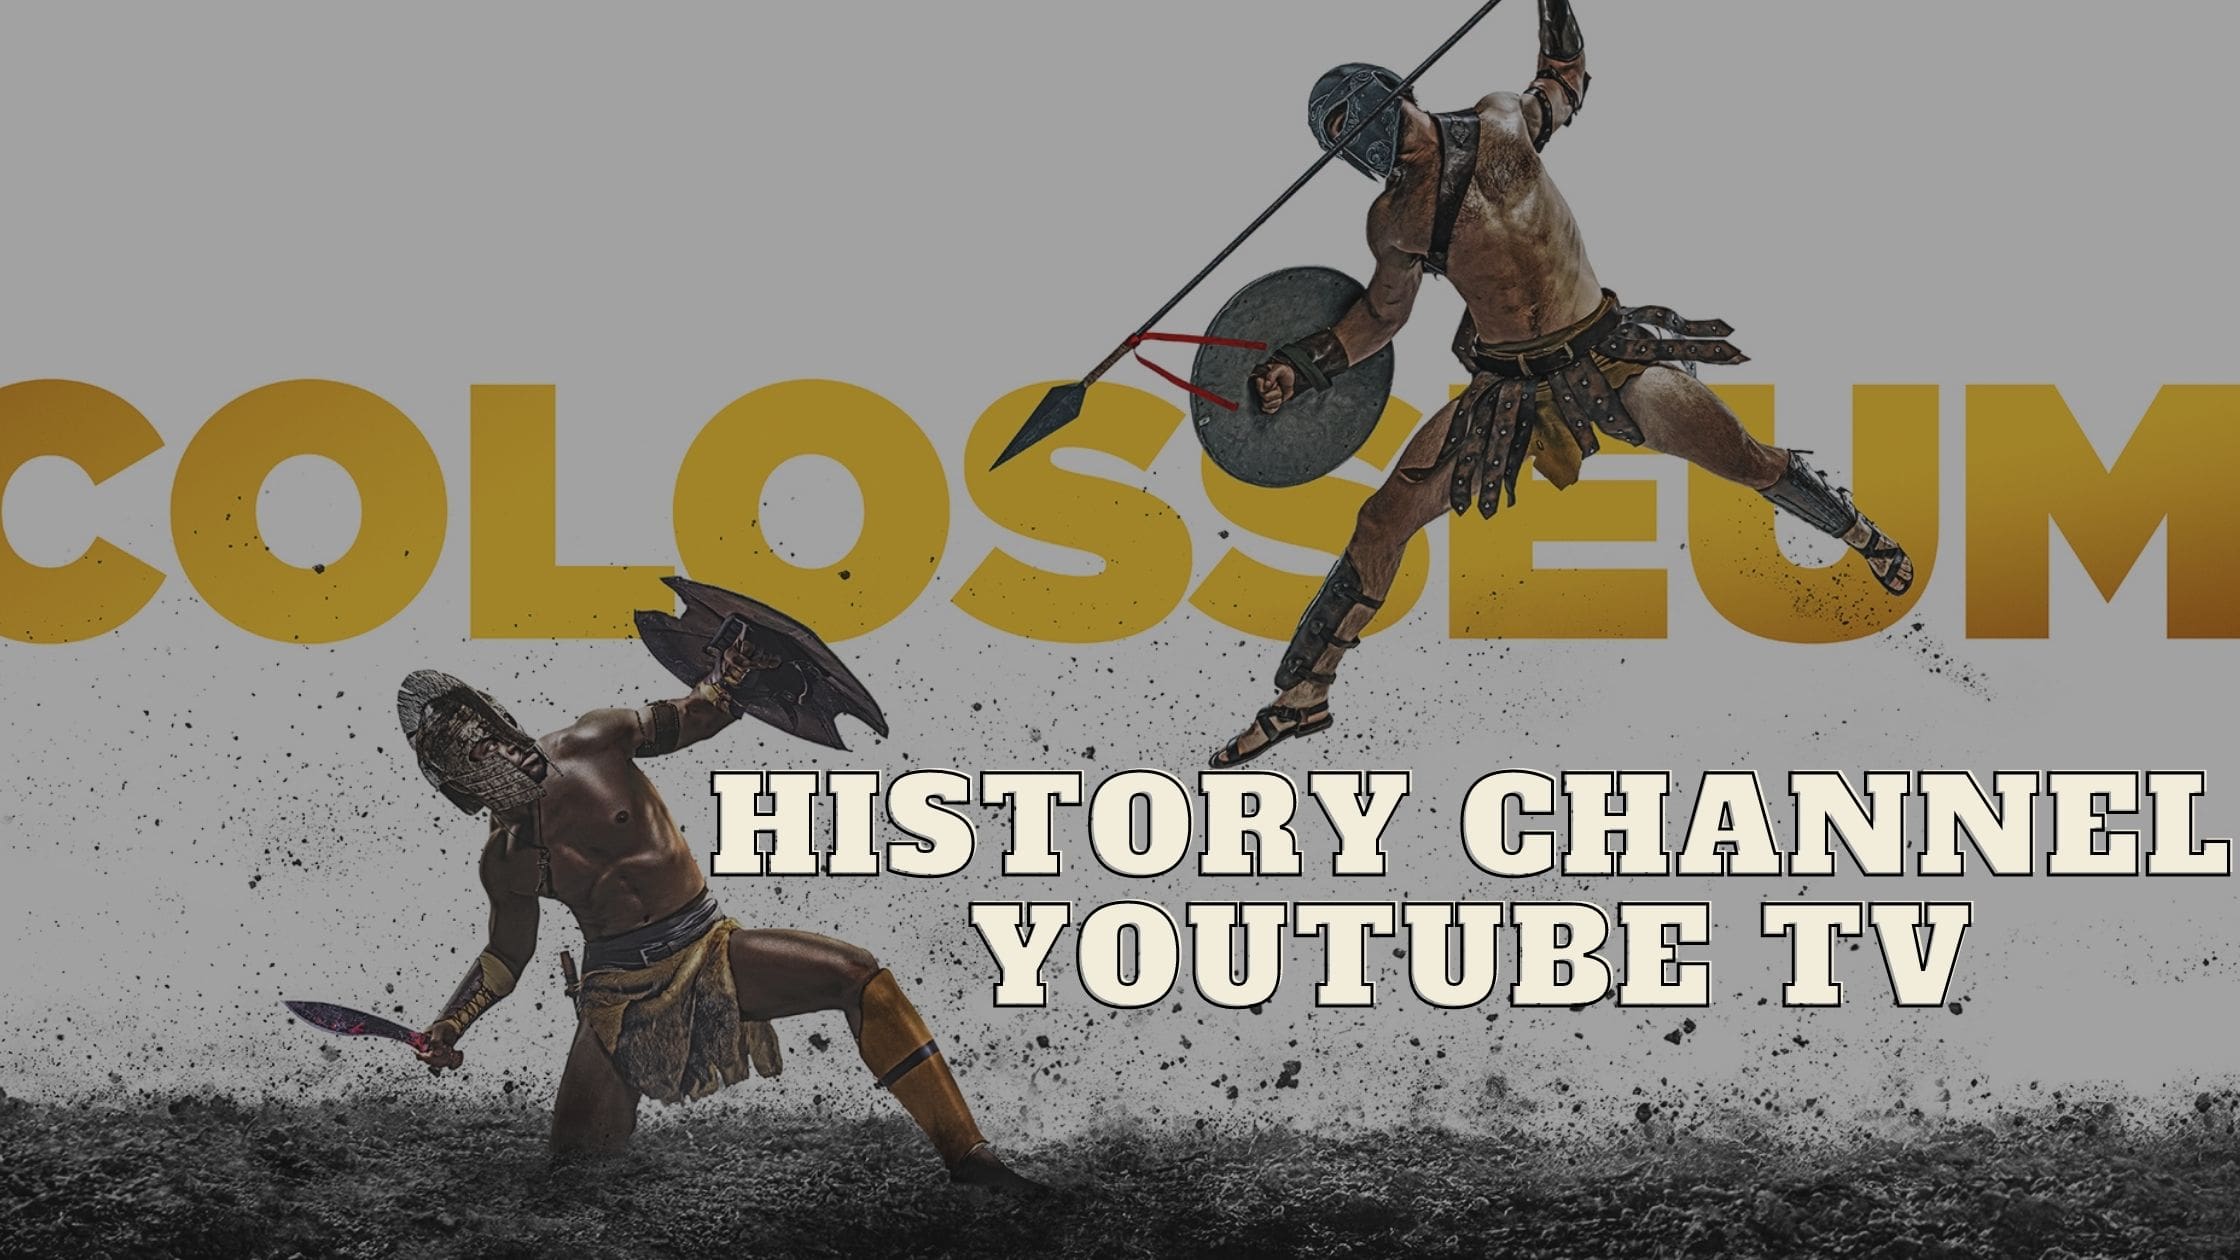 How to Watch History Channel on YouTube TV? | Domain Tech How to Watch History Channel YouTube TV min